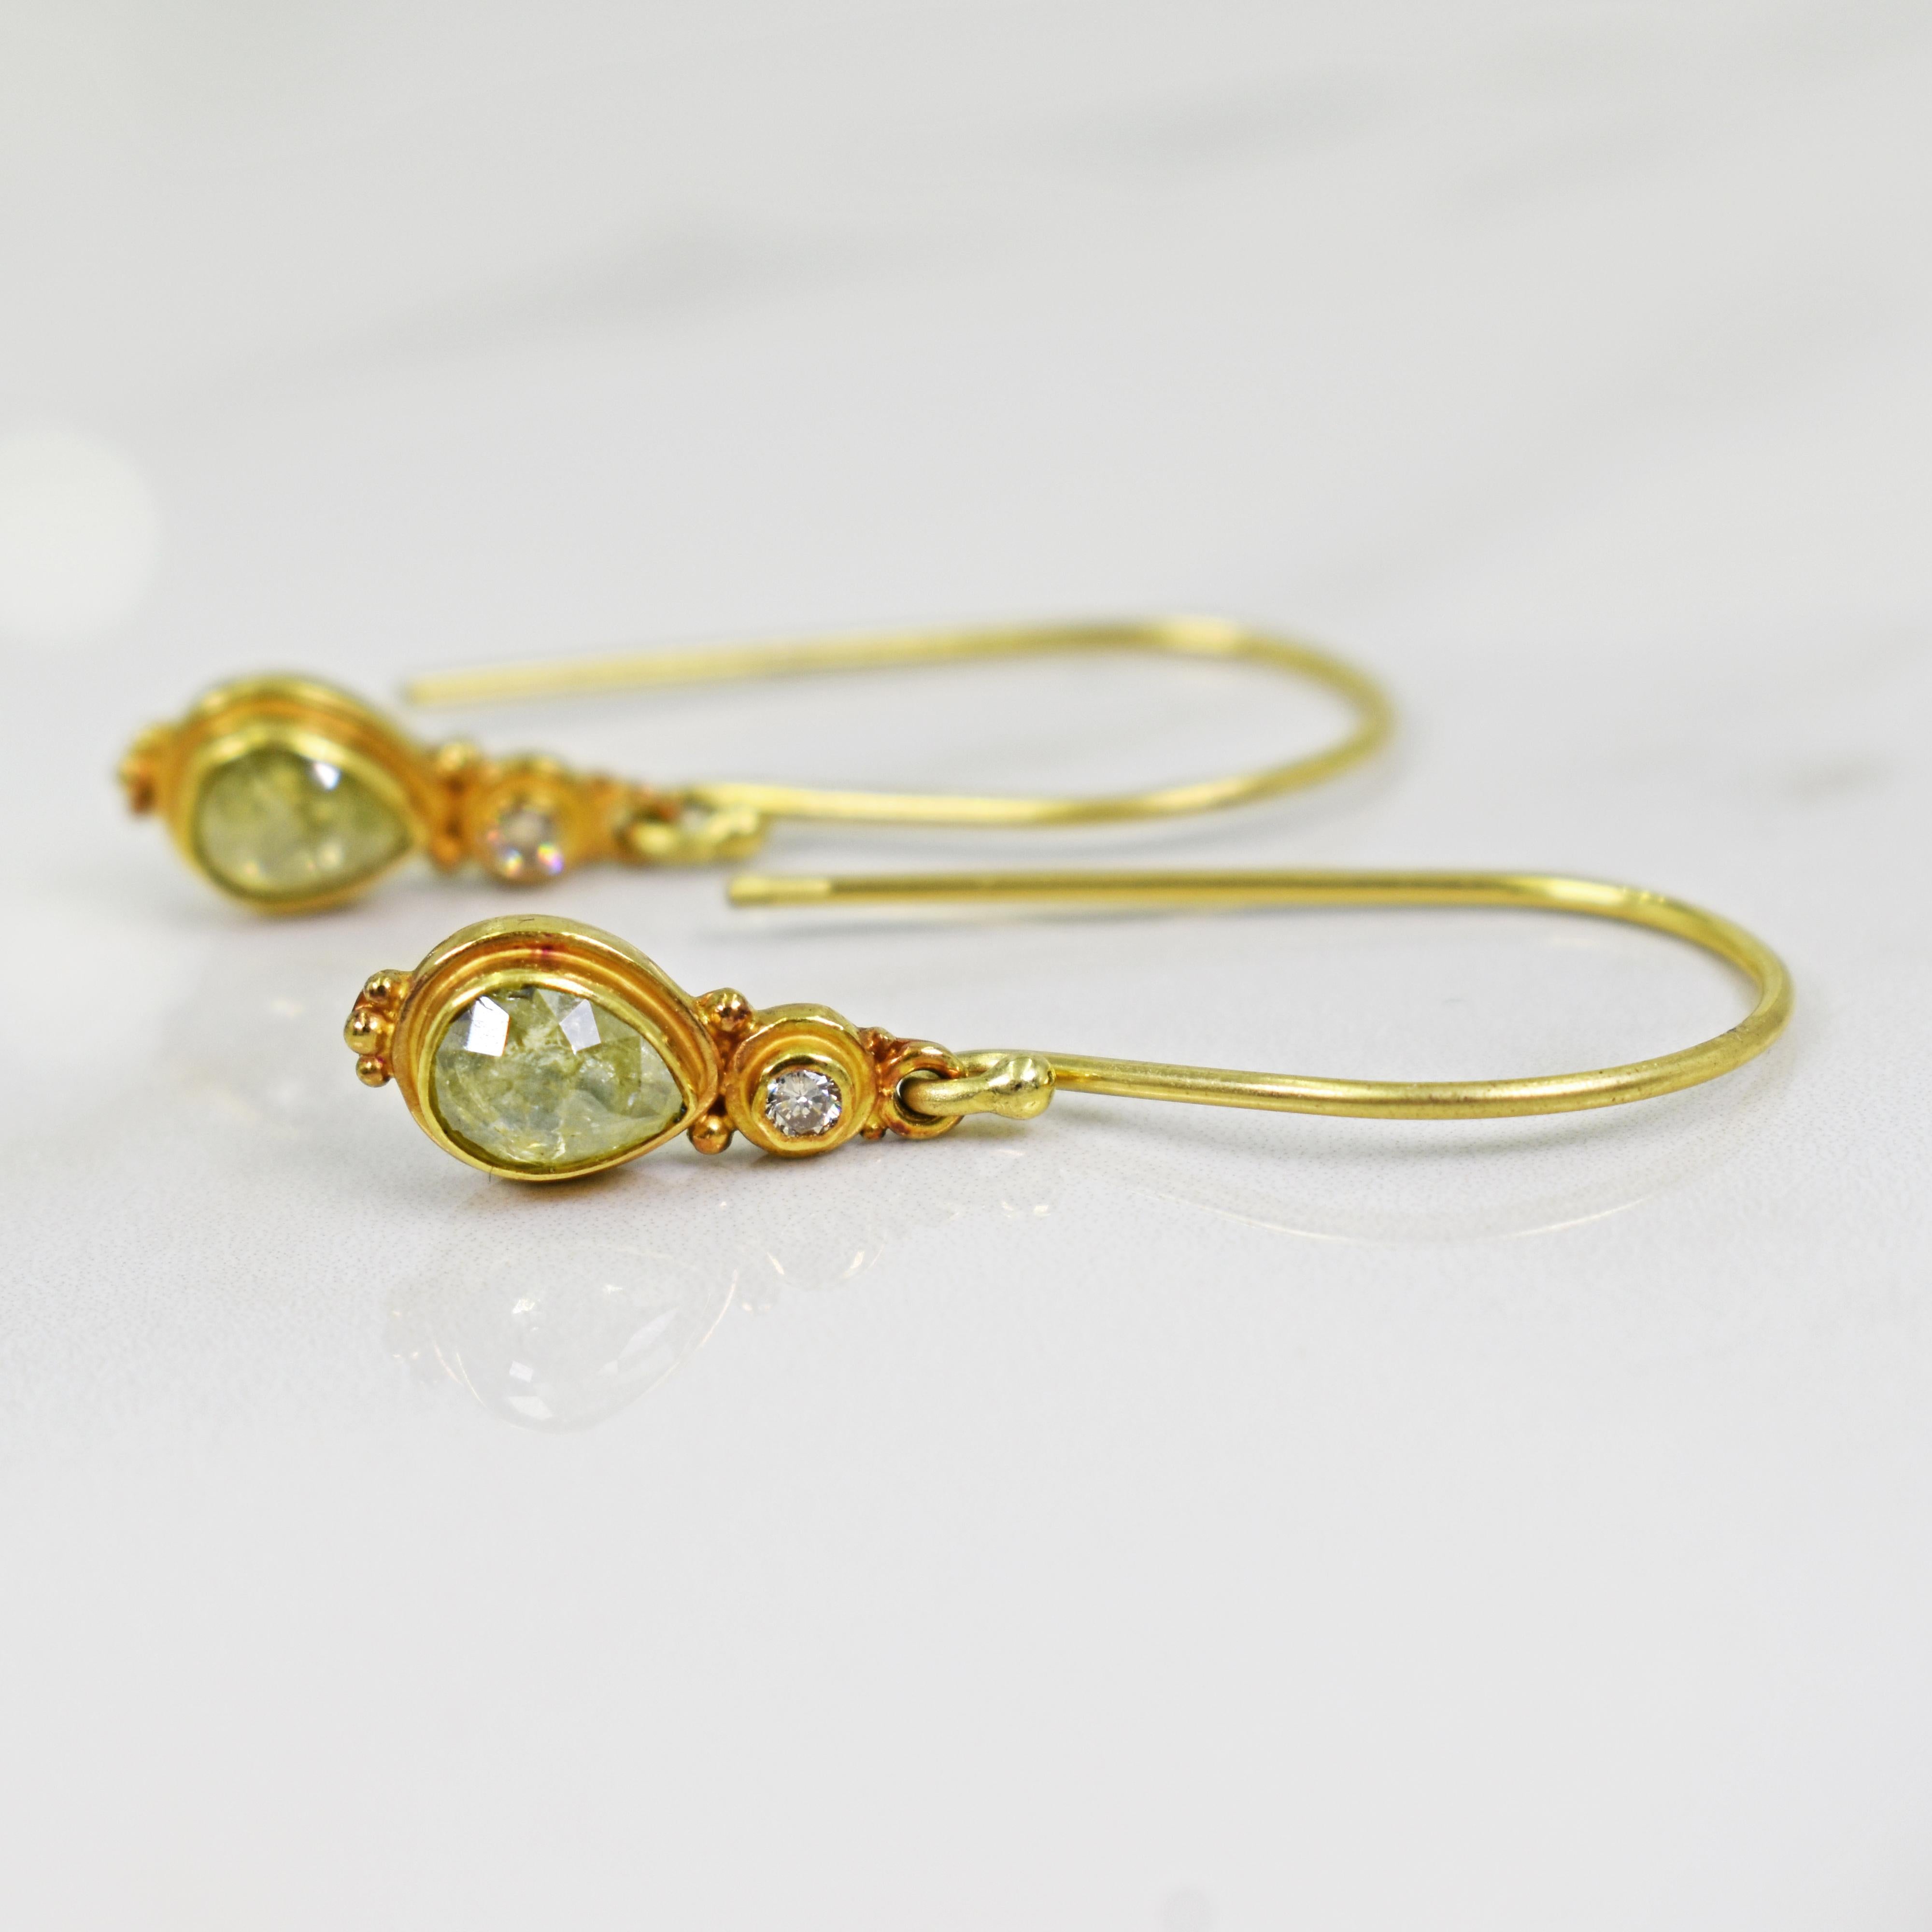 Raw, rose cut yellowish-green Diamond and round white Diamond 18k yellow gold dangle earrings. Earrings are 1.44 inches in length. Gorgeous and unique diamond dangle earrings. 